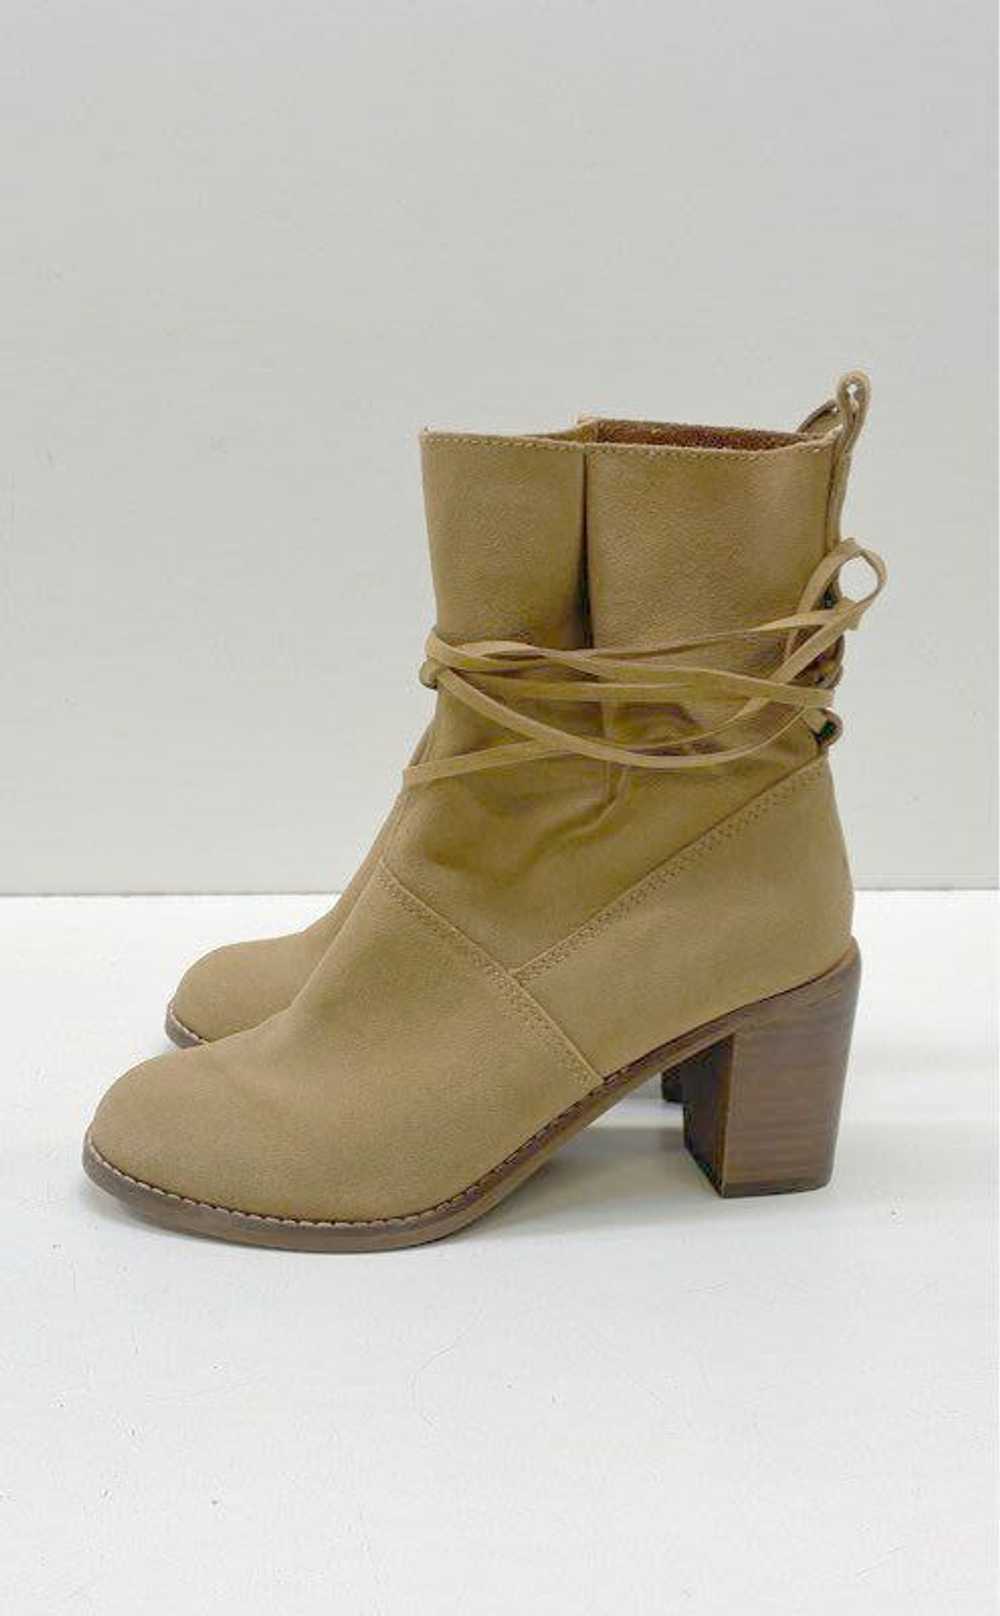 Toms Suede Mila Ankle Wrap Boots Beige 6 - image 2